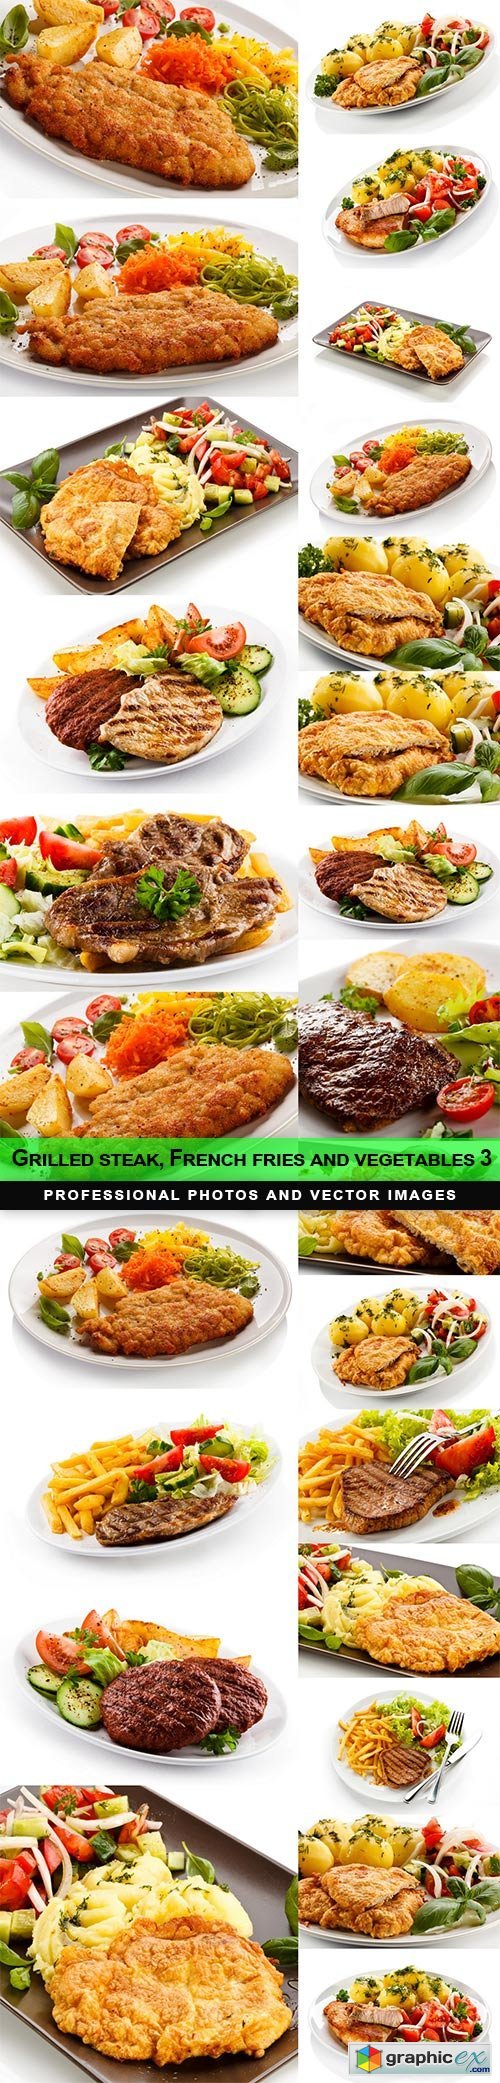 Grilled steak, French fries and vegetables 3